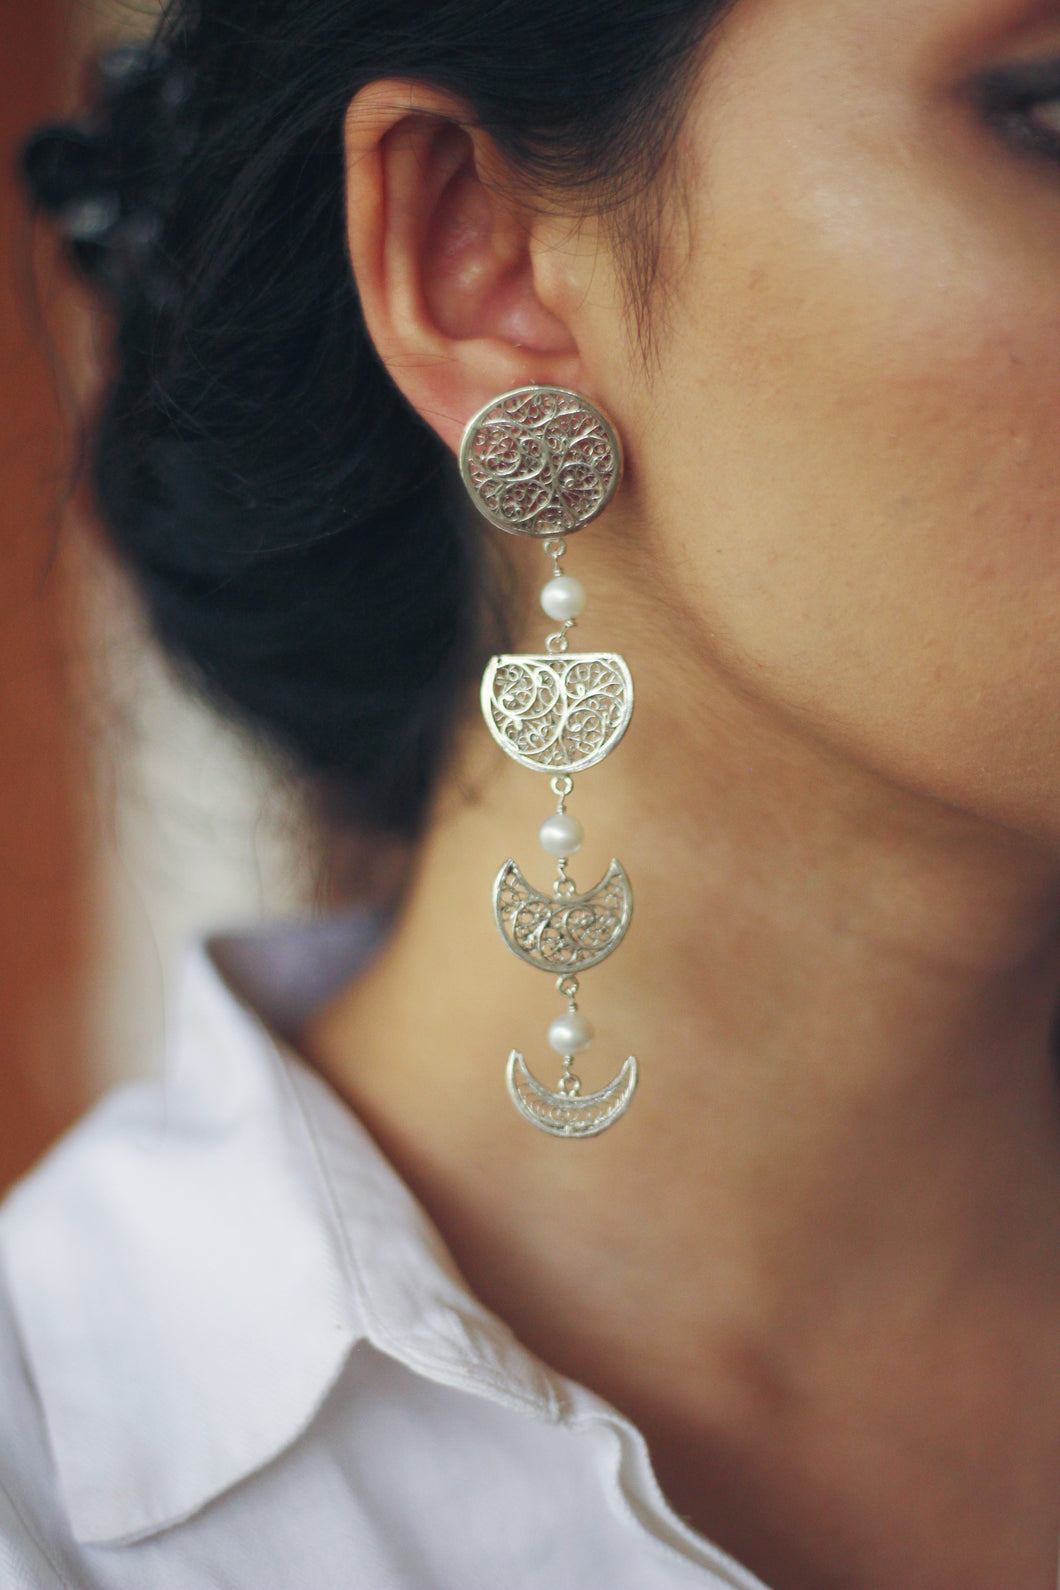 Phases of the Moon Earrings With Pearls